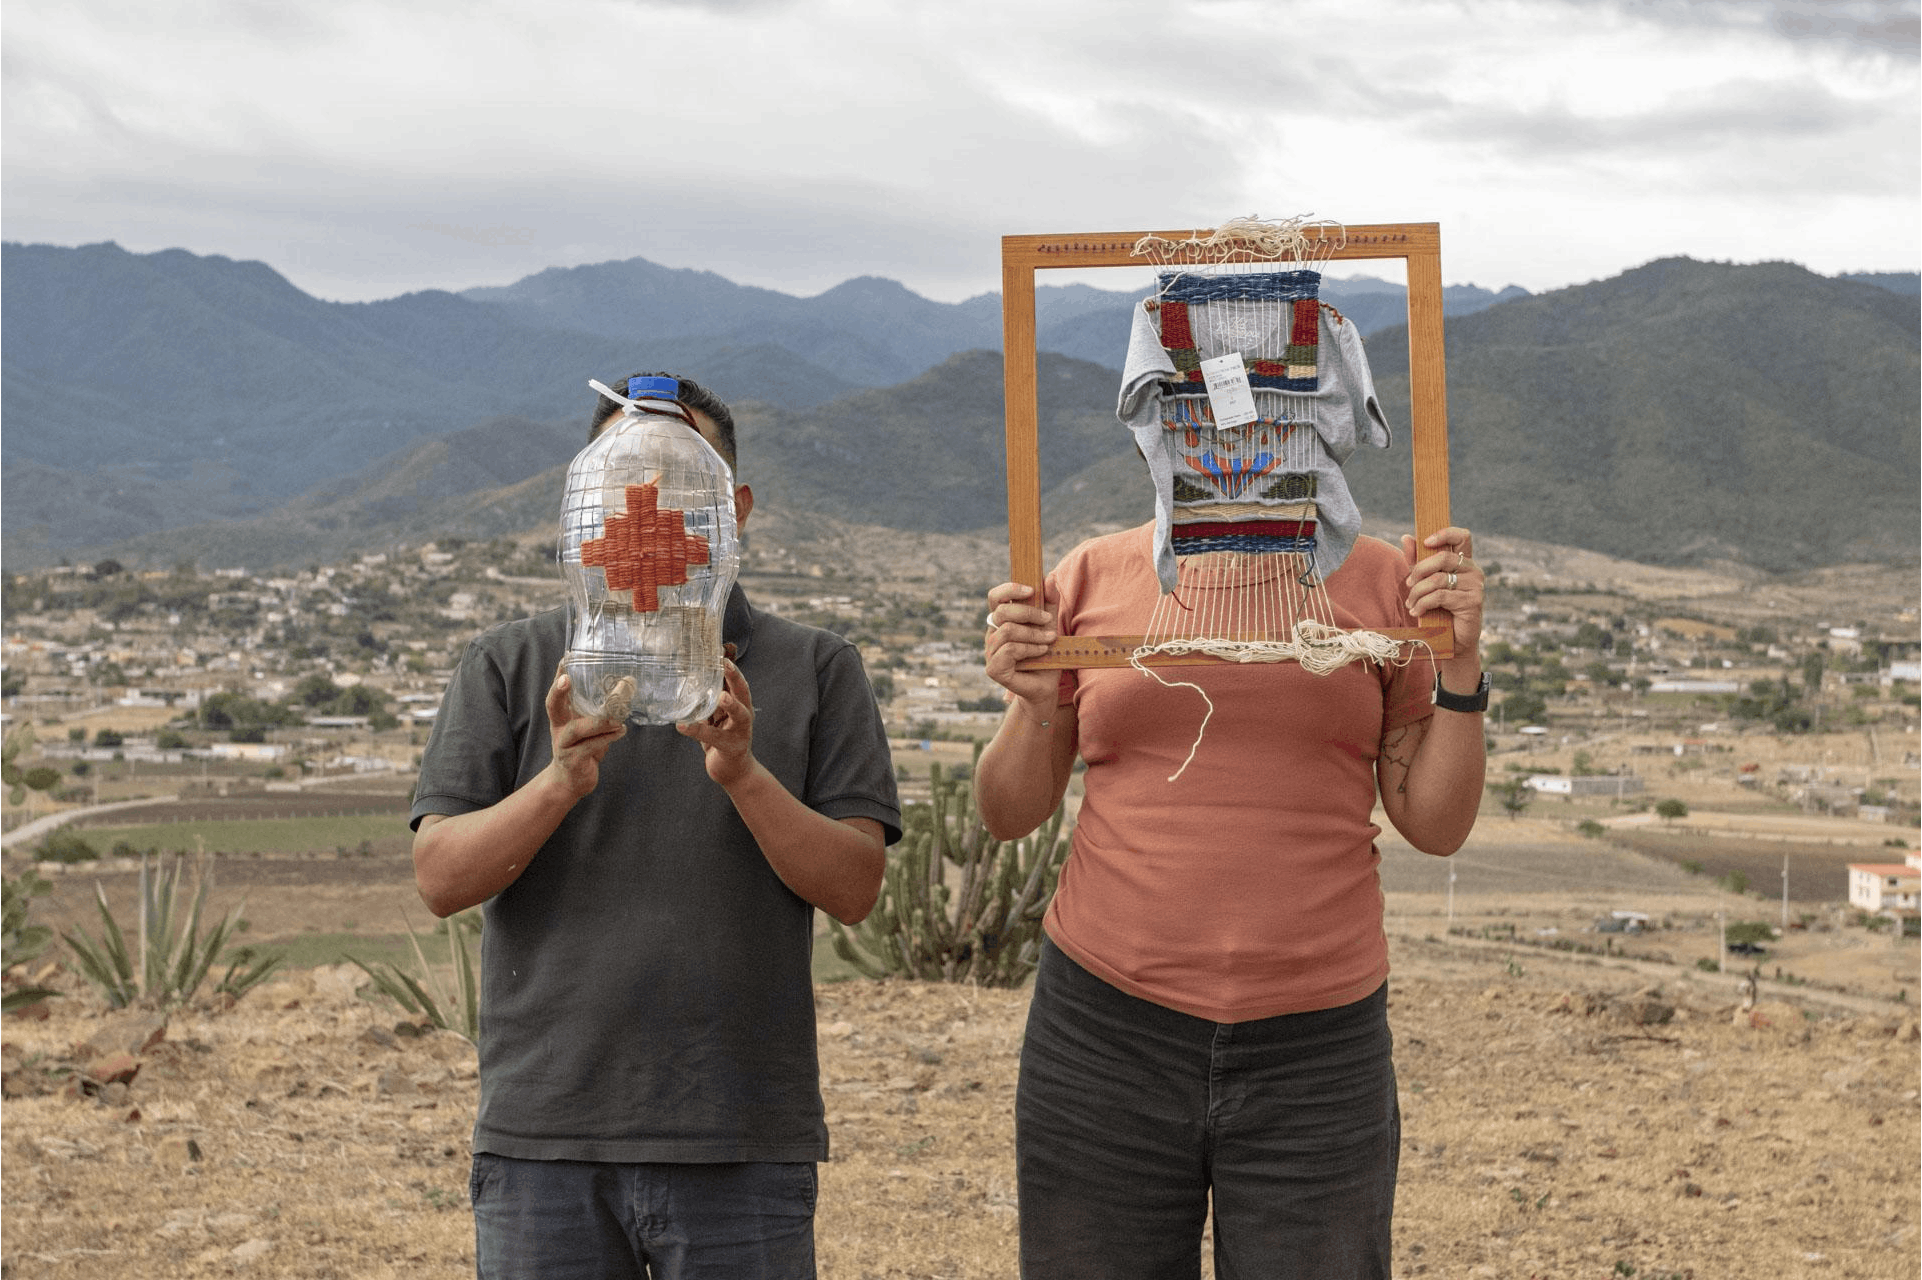 Color photograph of two people standing in front of a desert landscape. The figure on the right holds a wood frame with weaving in front of their face. The figure on the left holds a plastic water bottle in front of their face.